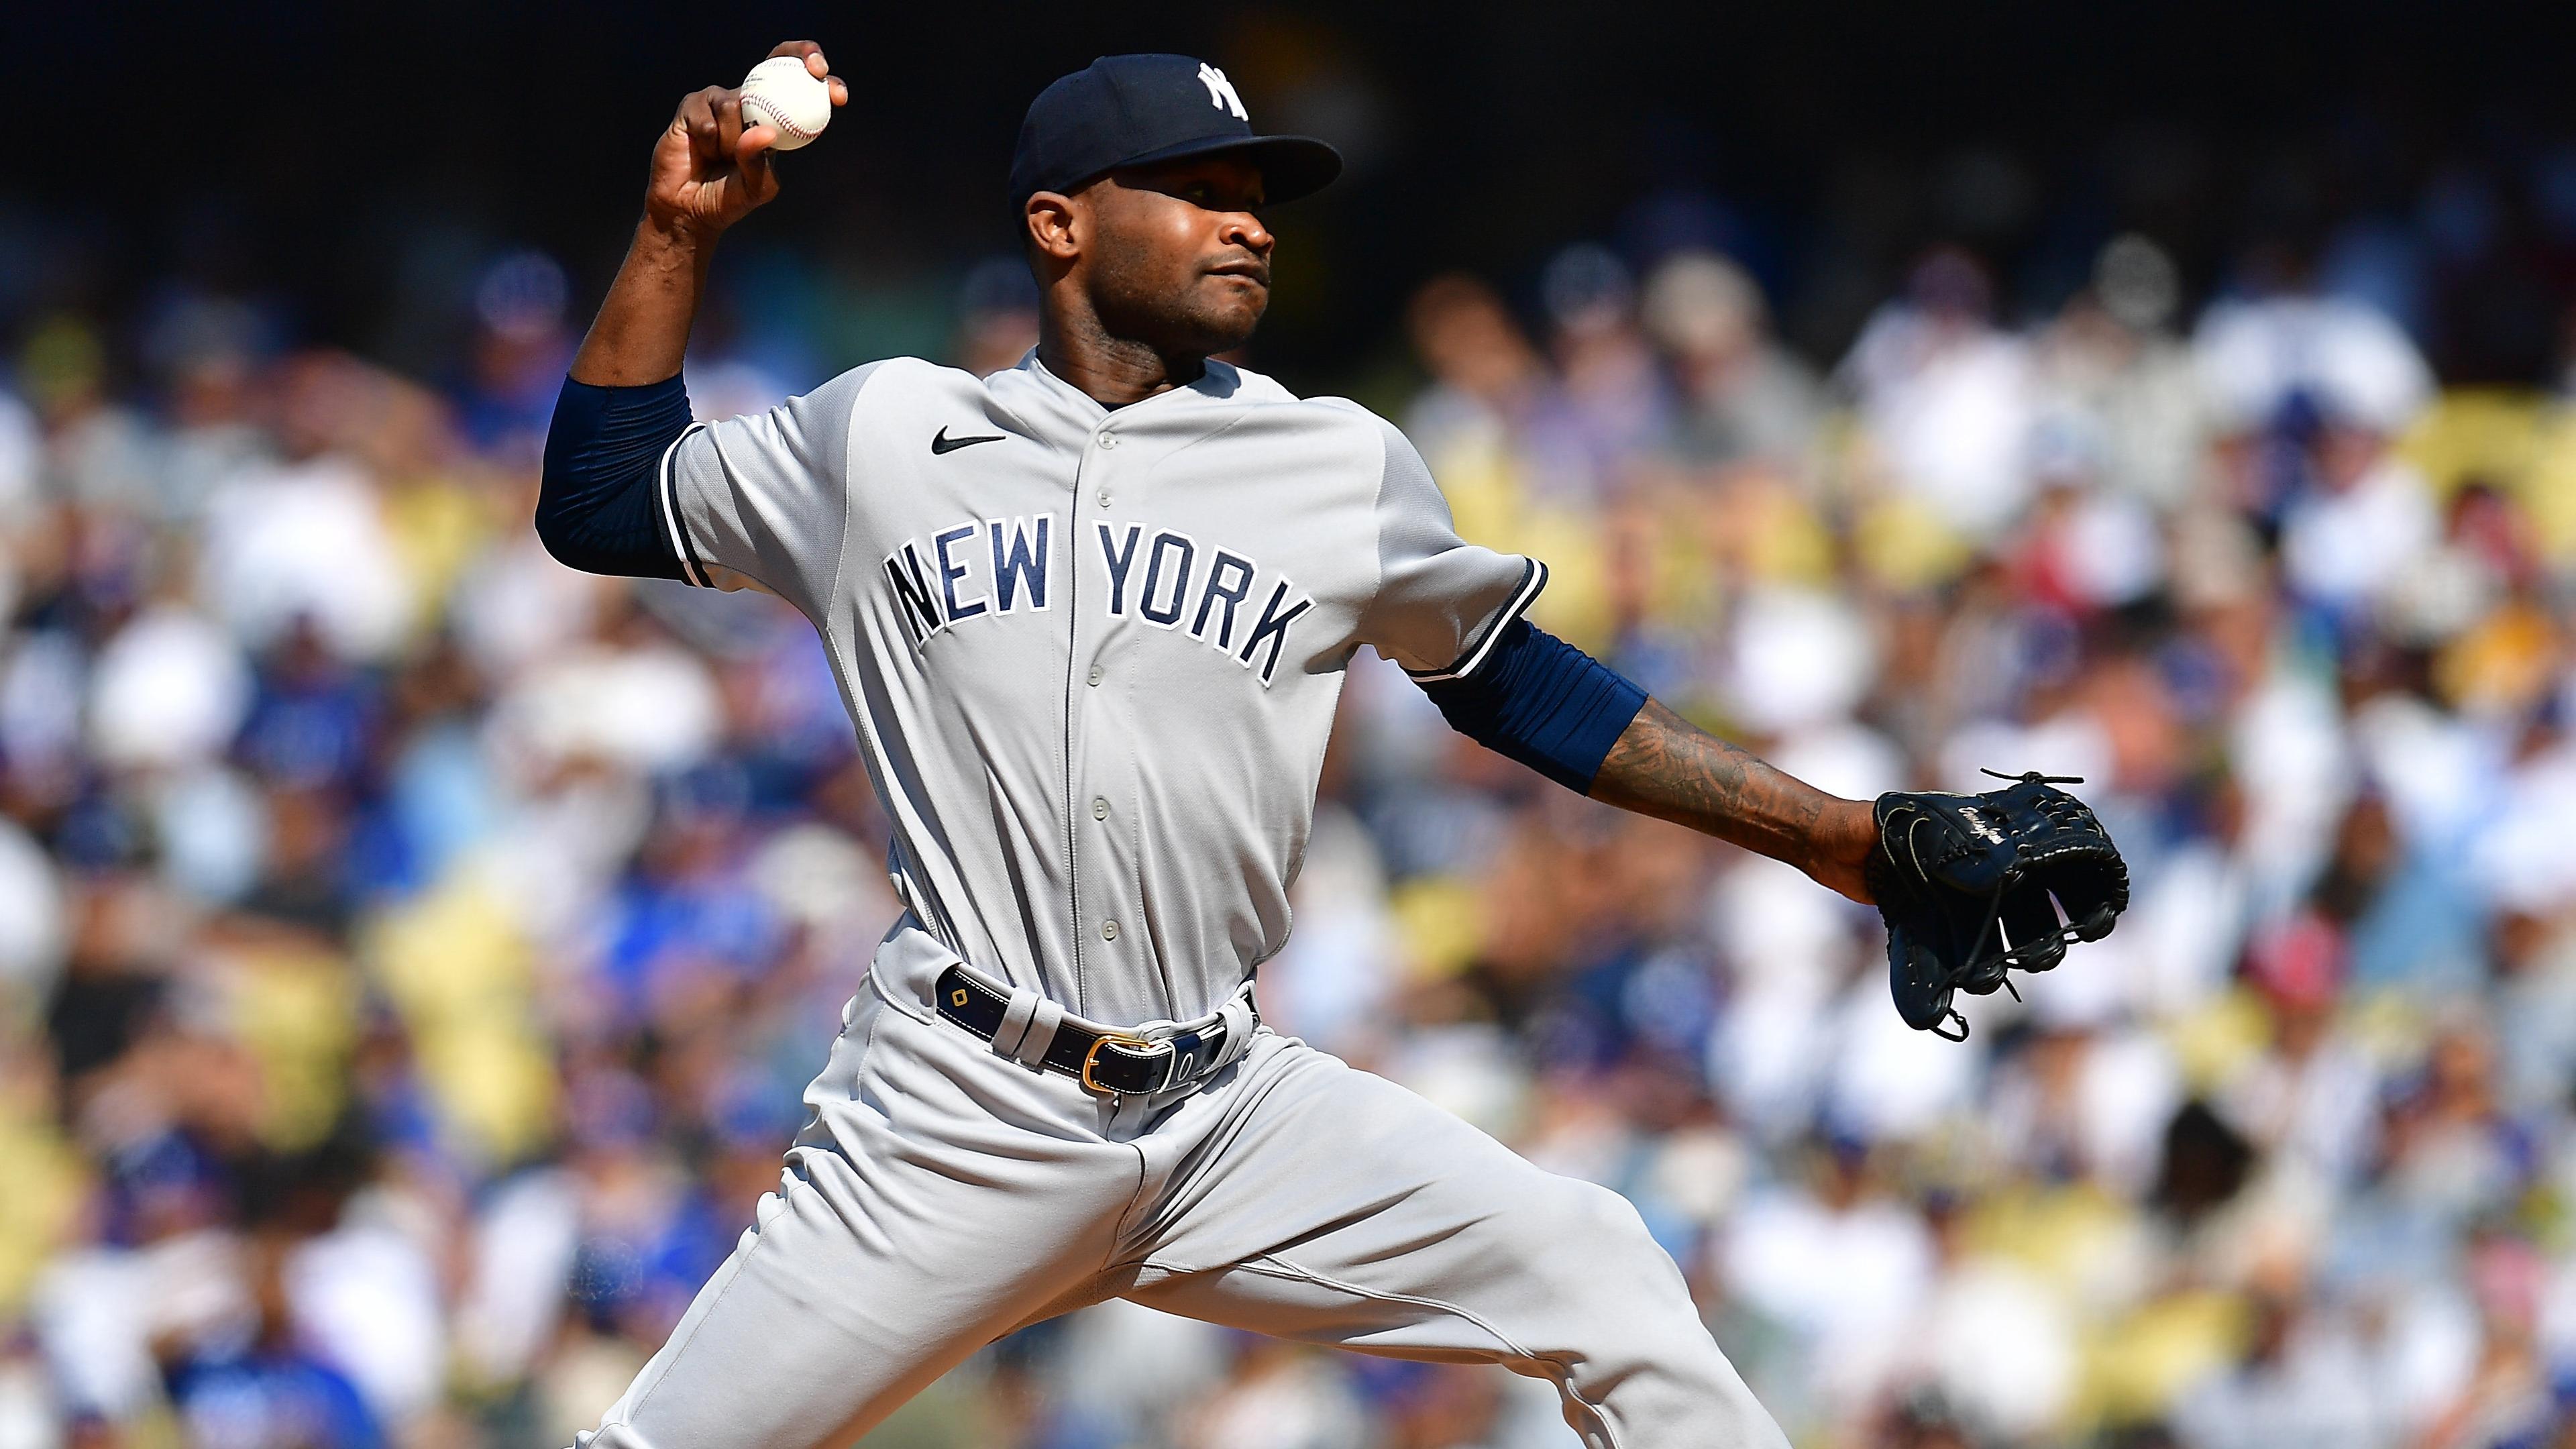 New York Yankees starting pitcher Domingo German (0) throws against the Los Angeles Dodgers during the first inning at Dodger Stadium / Gary A. Vasquez - USA TODAY Sports